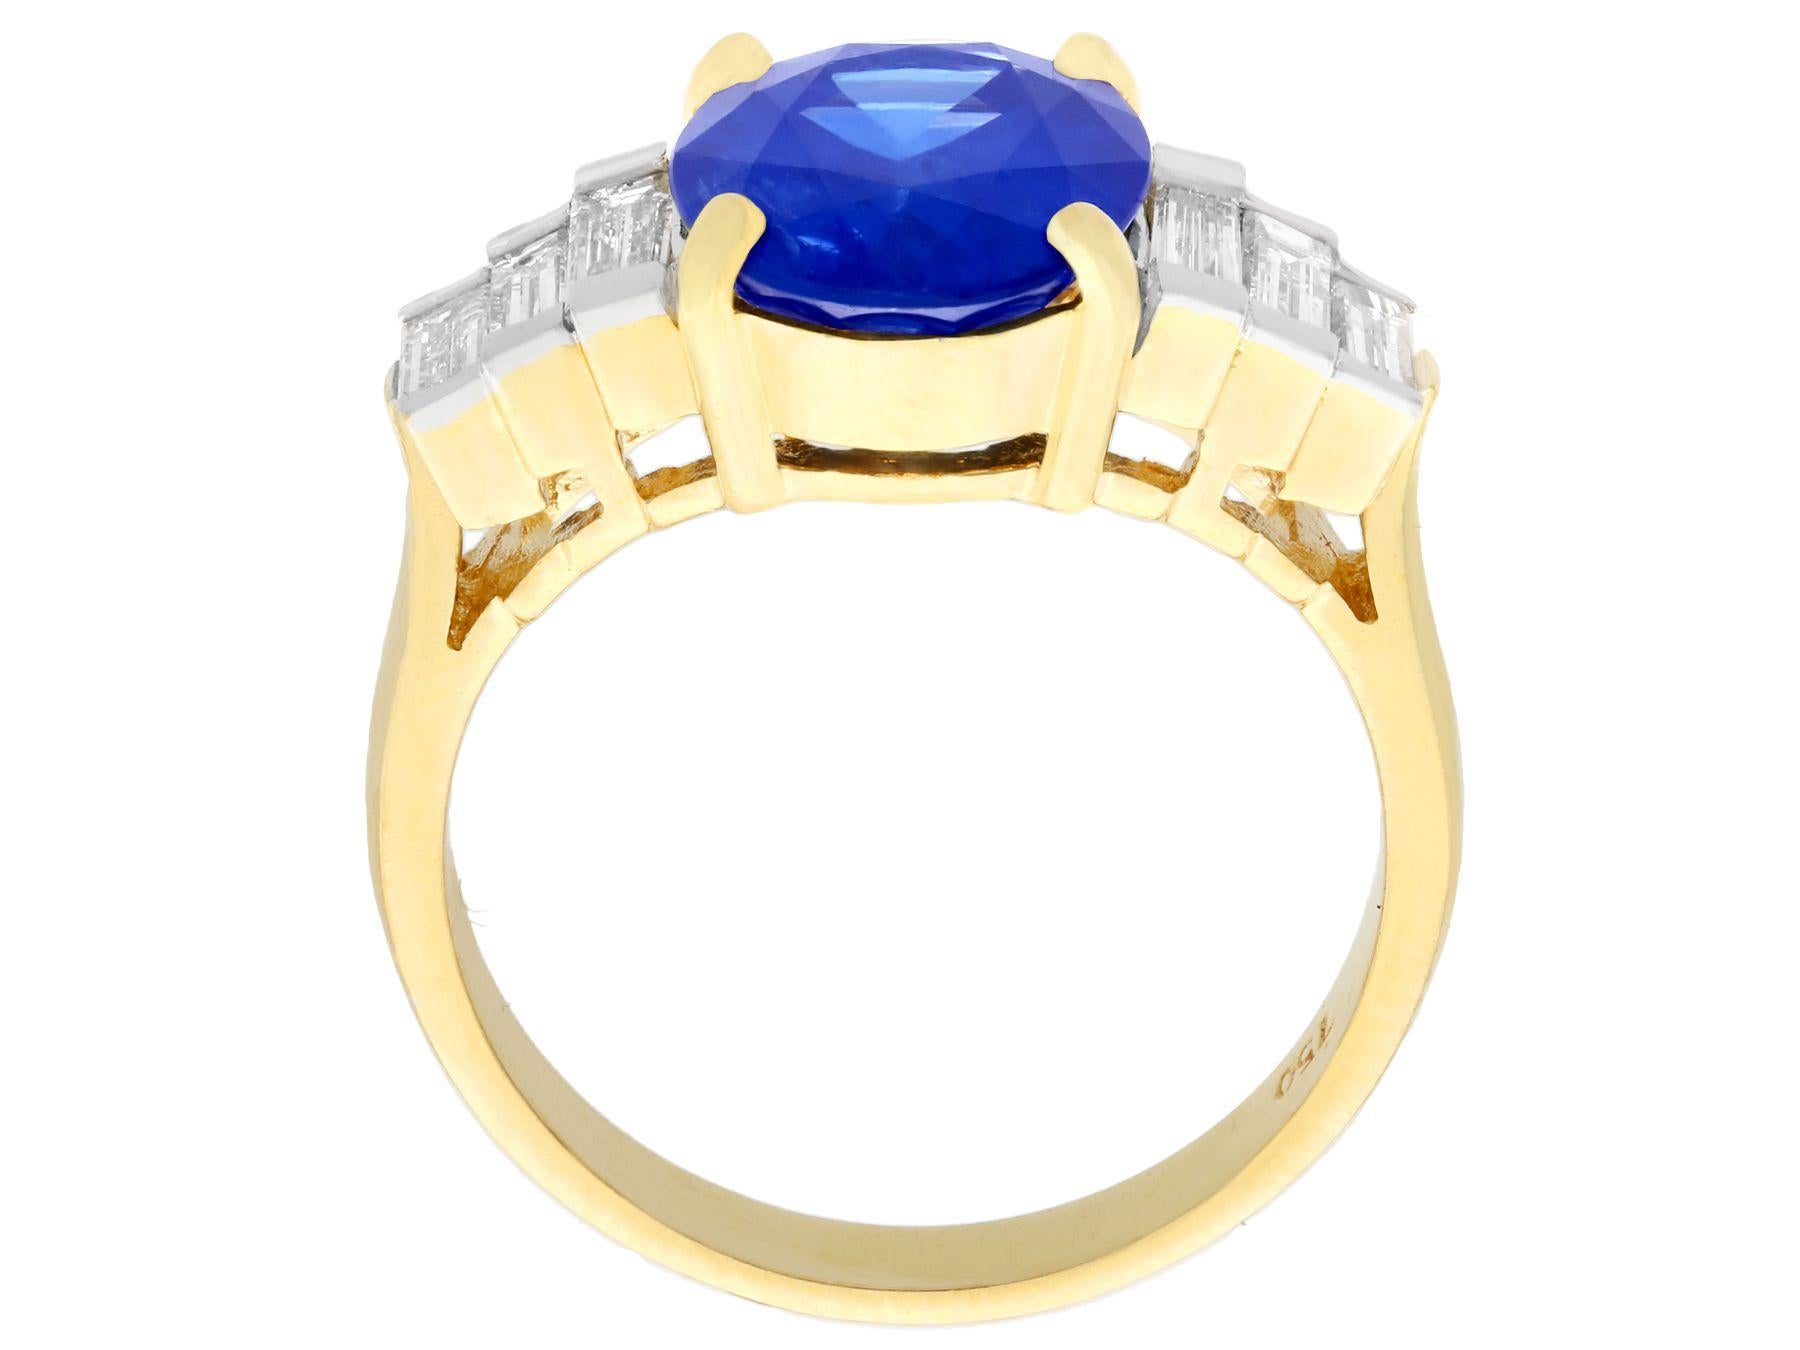 Vintage 4.59 Carat Oval Cut Sapphire and 1.02 Carat Diamond Yellow Gold Ring For Sale 1